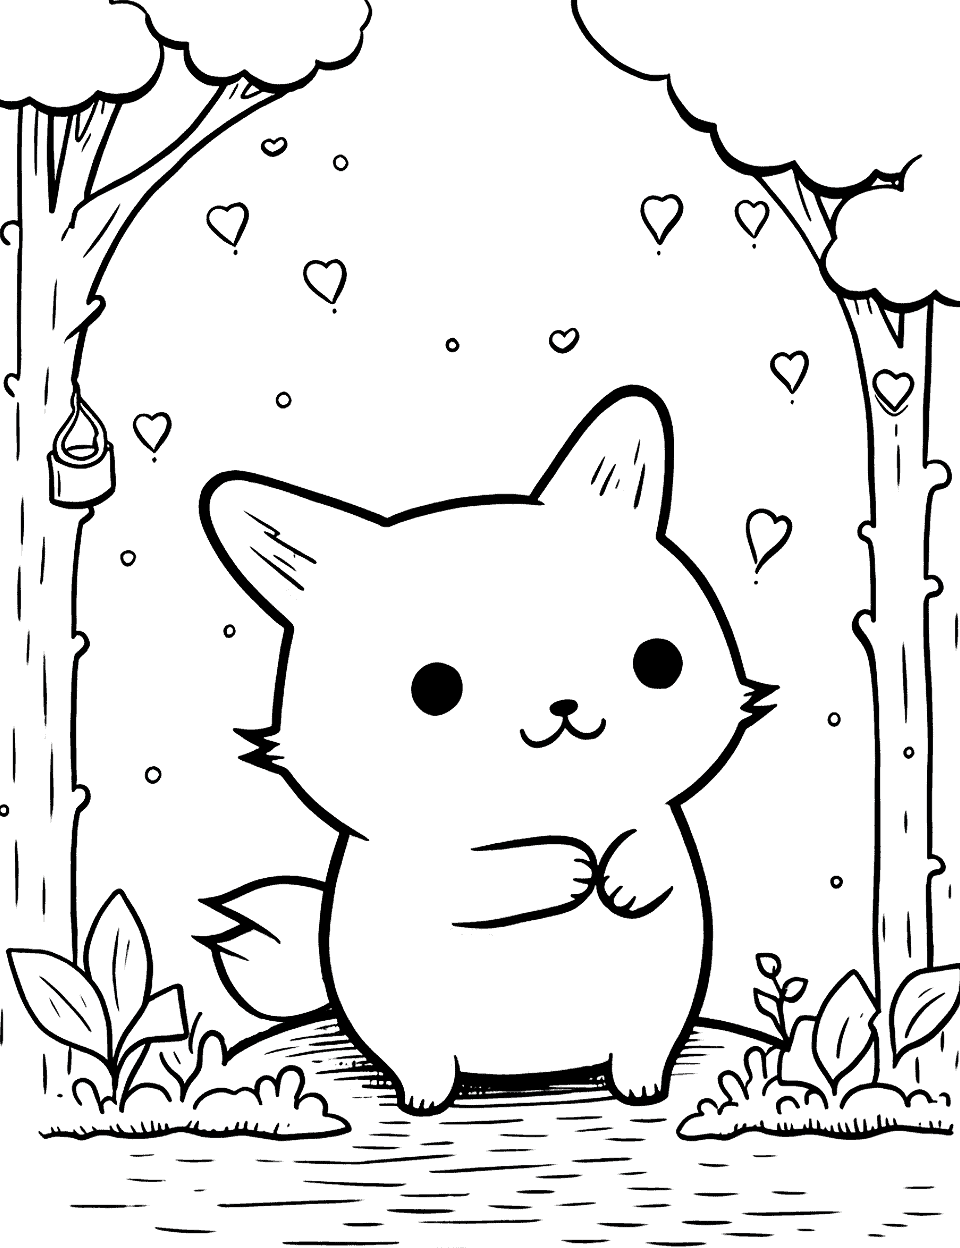 Fox's Fairy Tale Forest Kawaii Coloring Page - A Kawaii fox exploring a fairy tale forest.